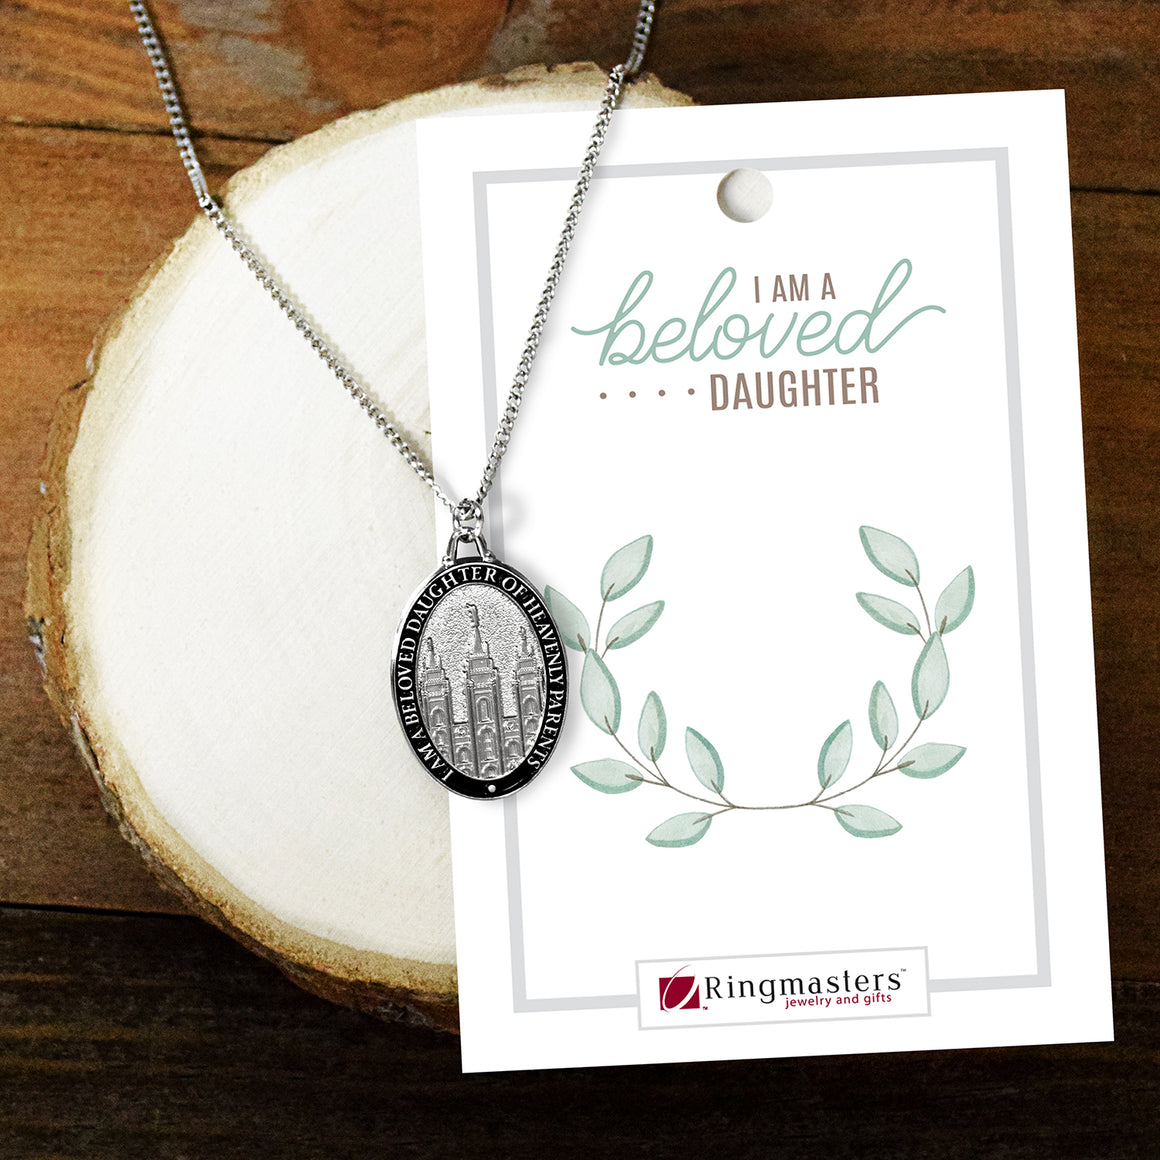 I am a Daughter of God Young Women Theme Necklace - Young Women Theme